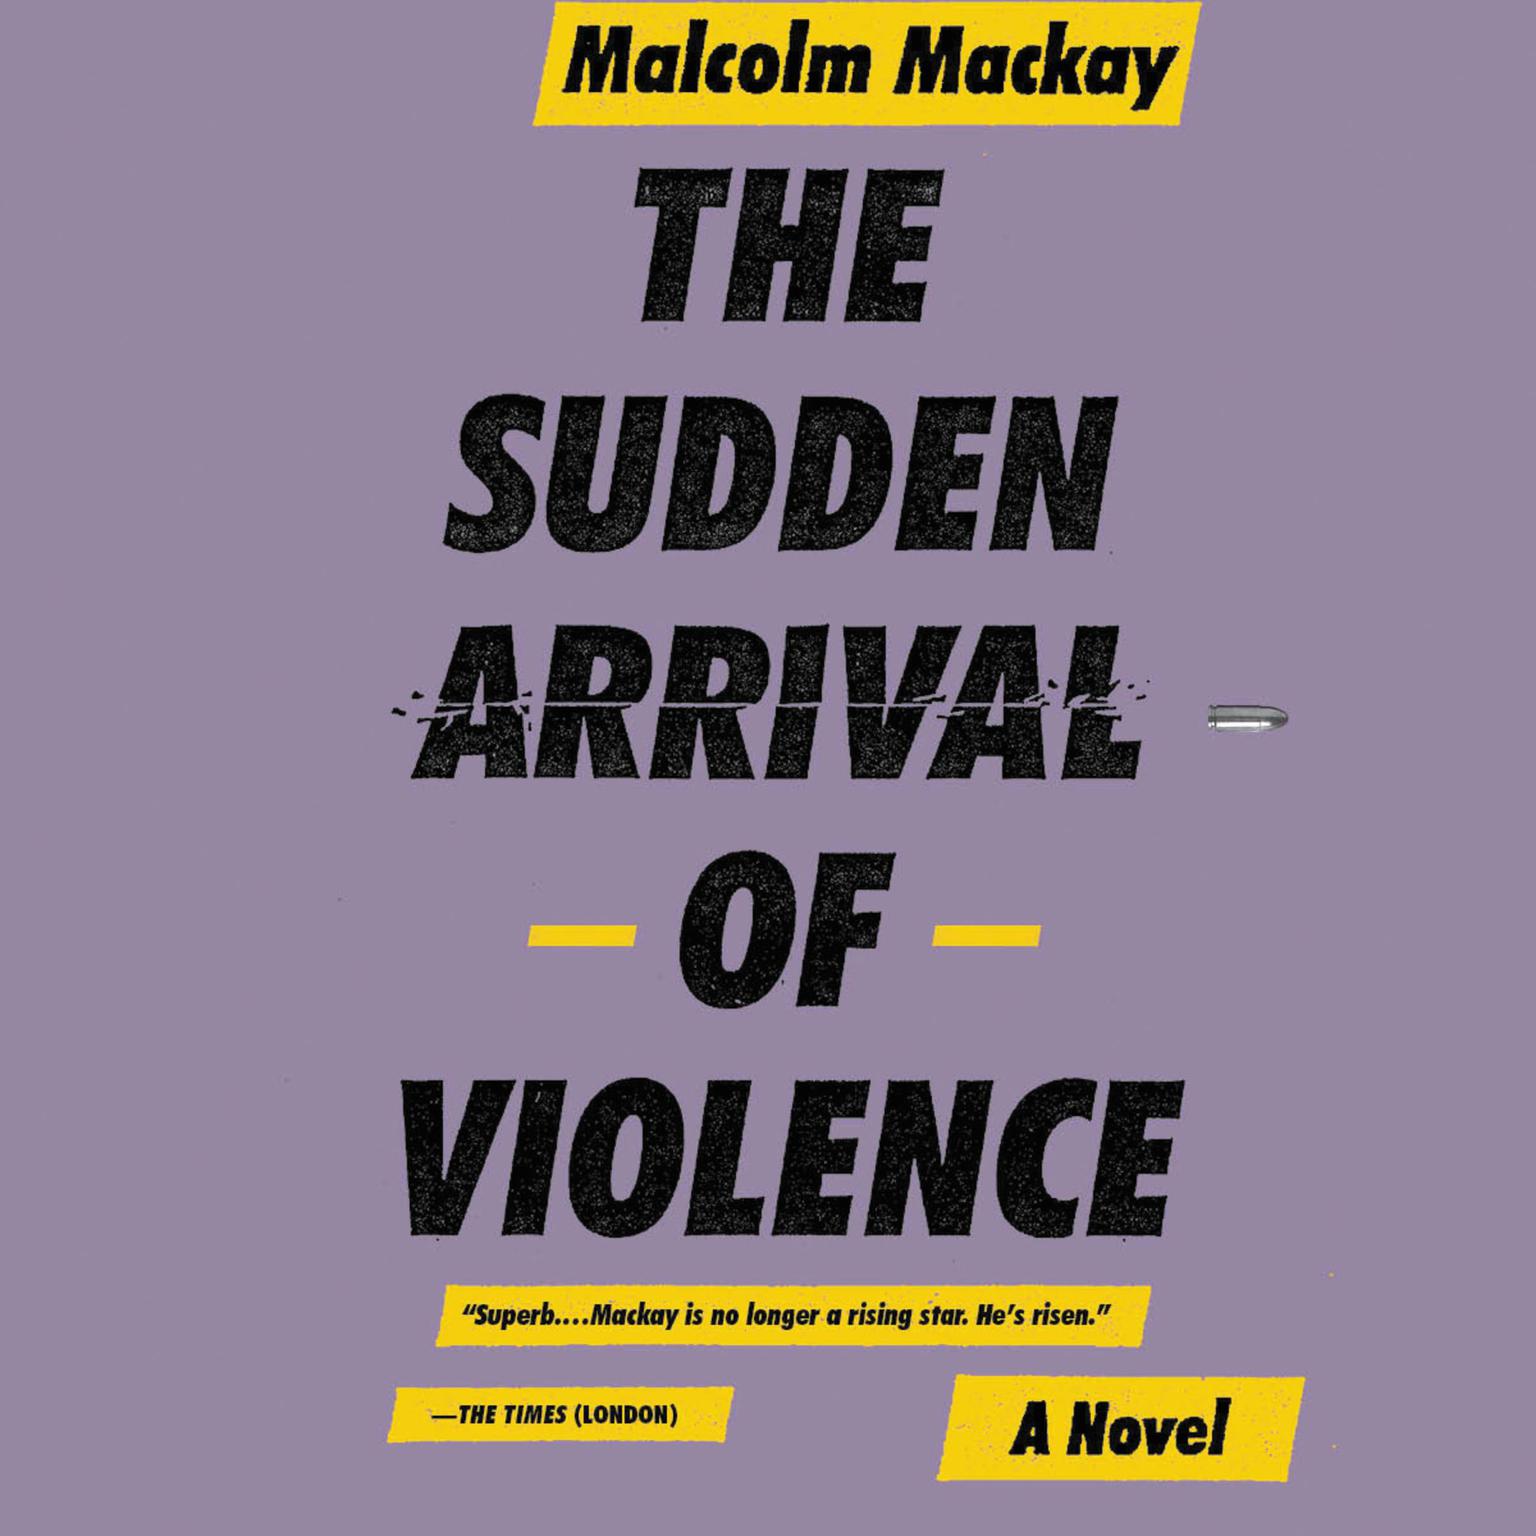 The Sudden Arrival of Violence Audiobook, by Malcolm Mackay